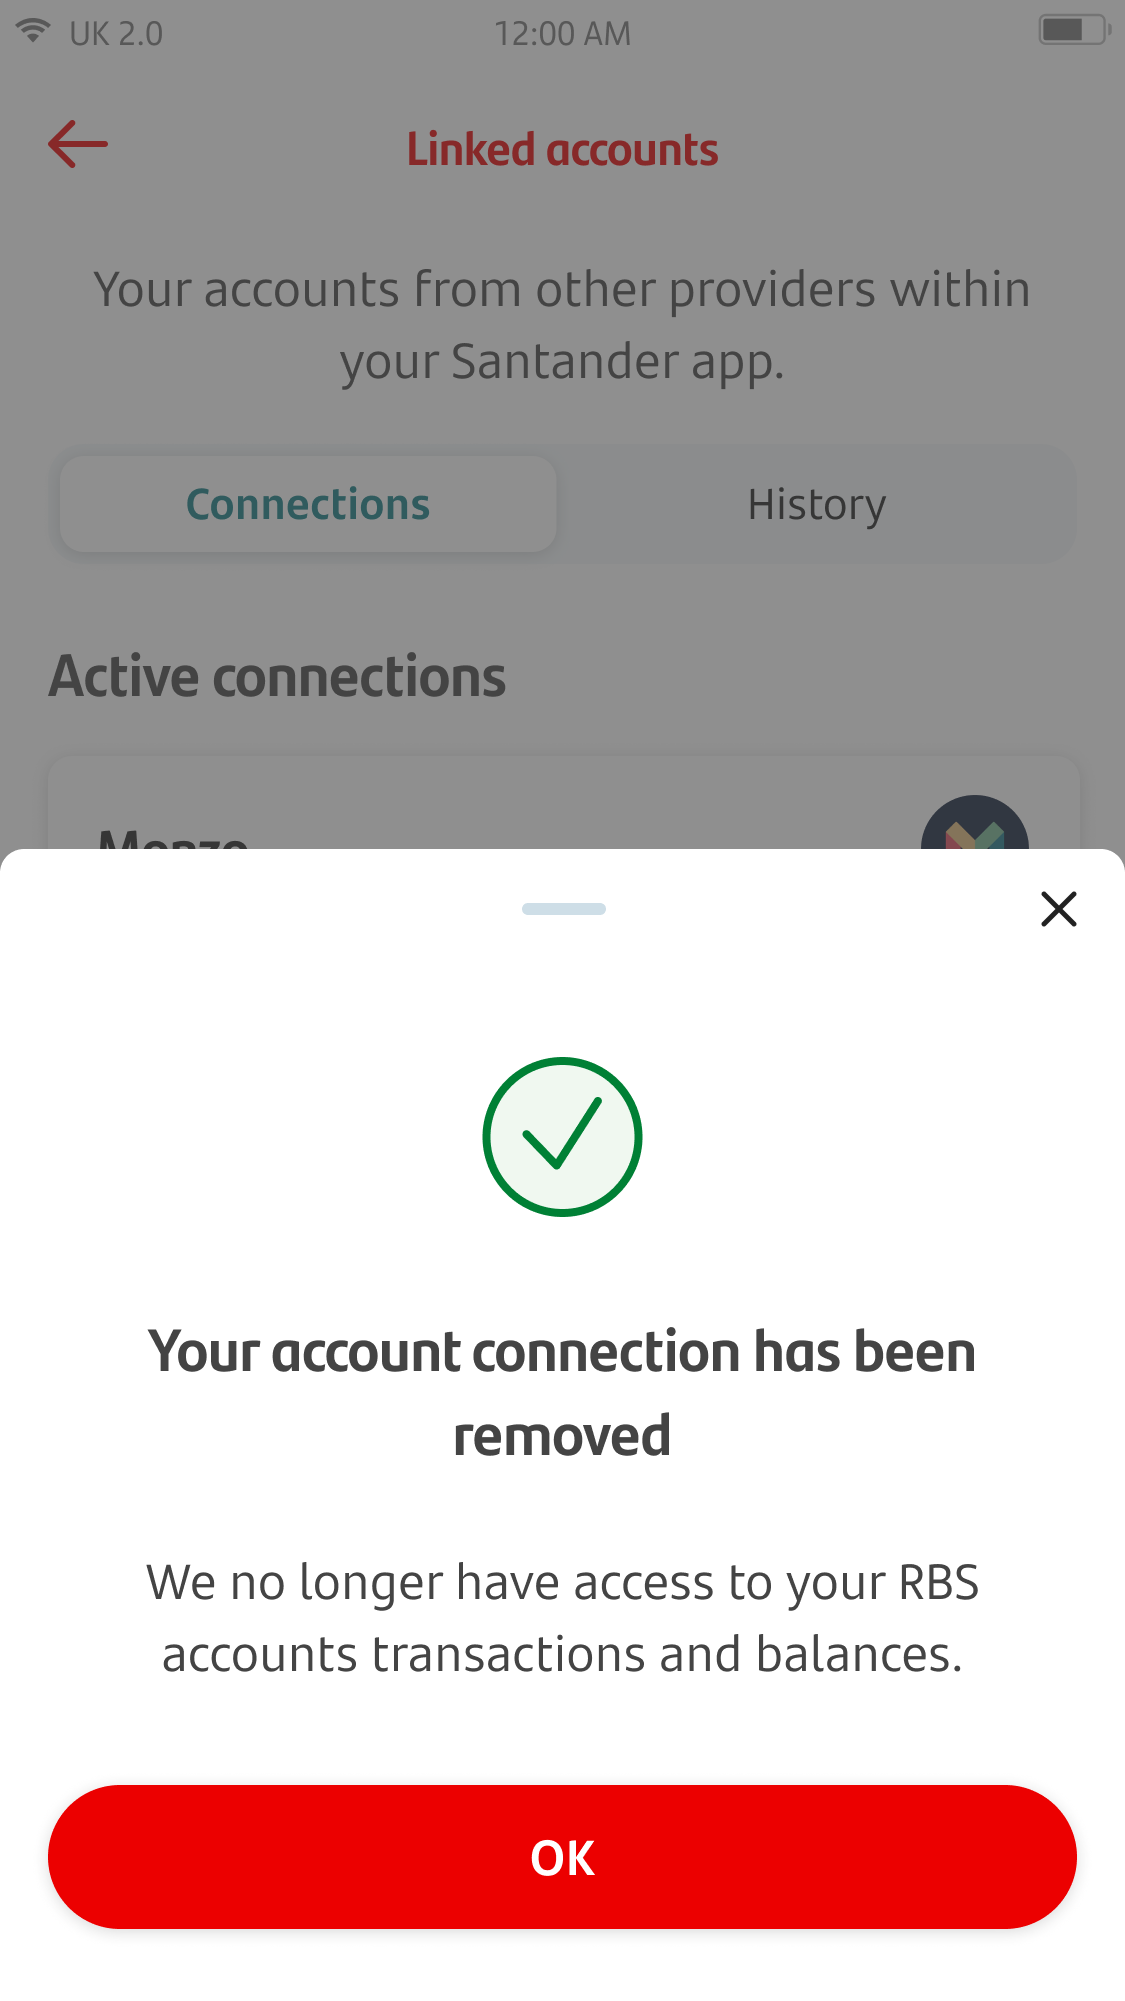 Confirmation screen for account connection removed